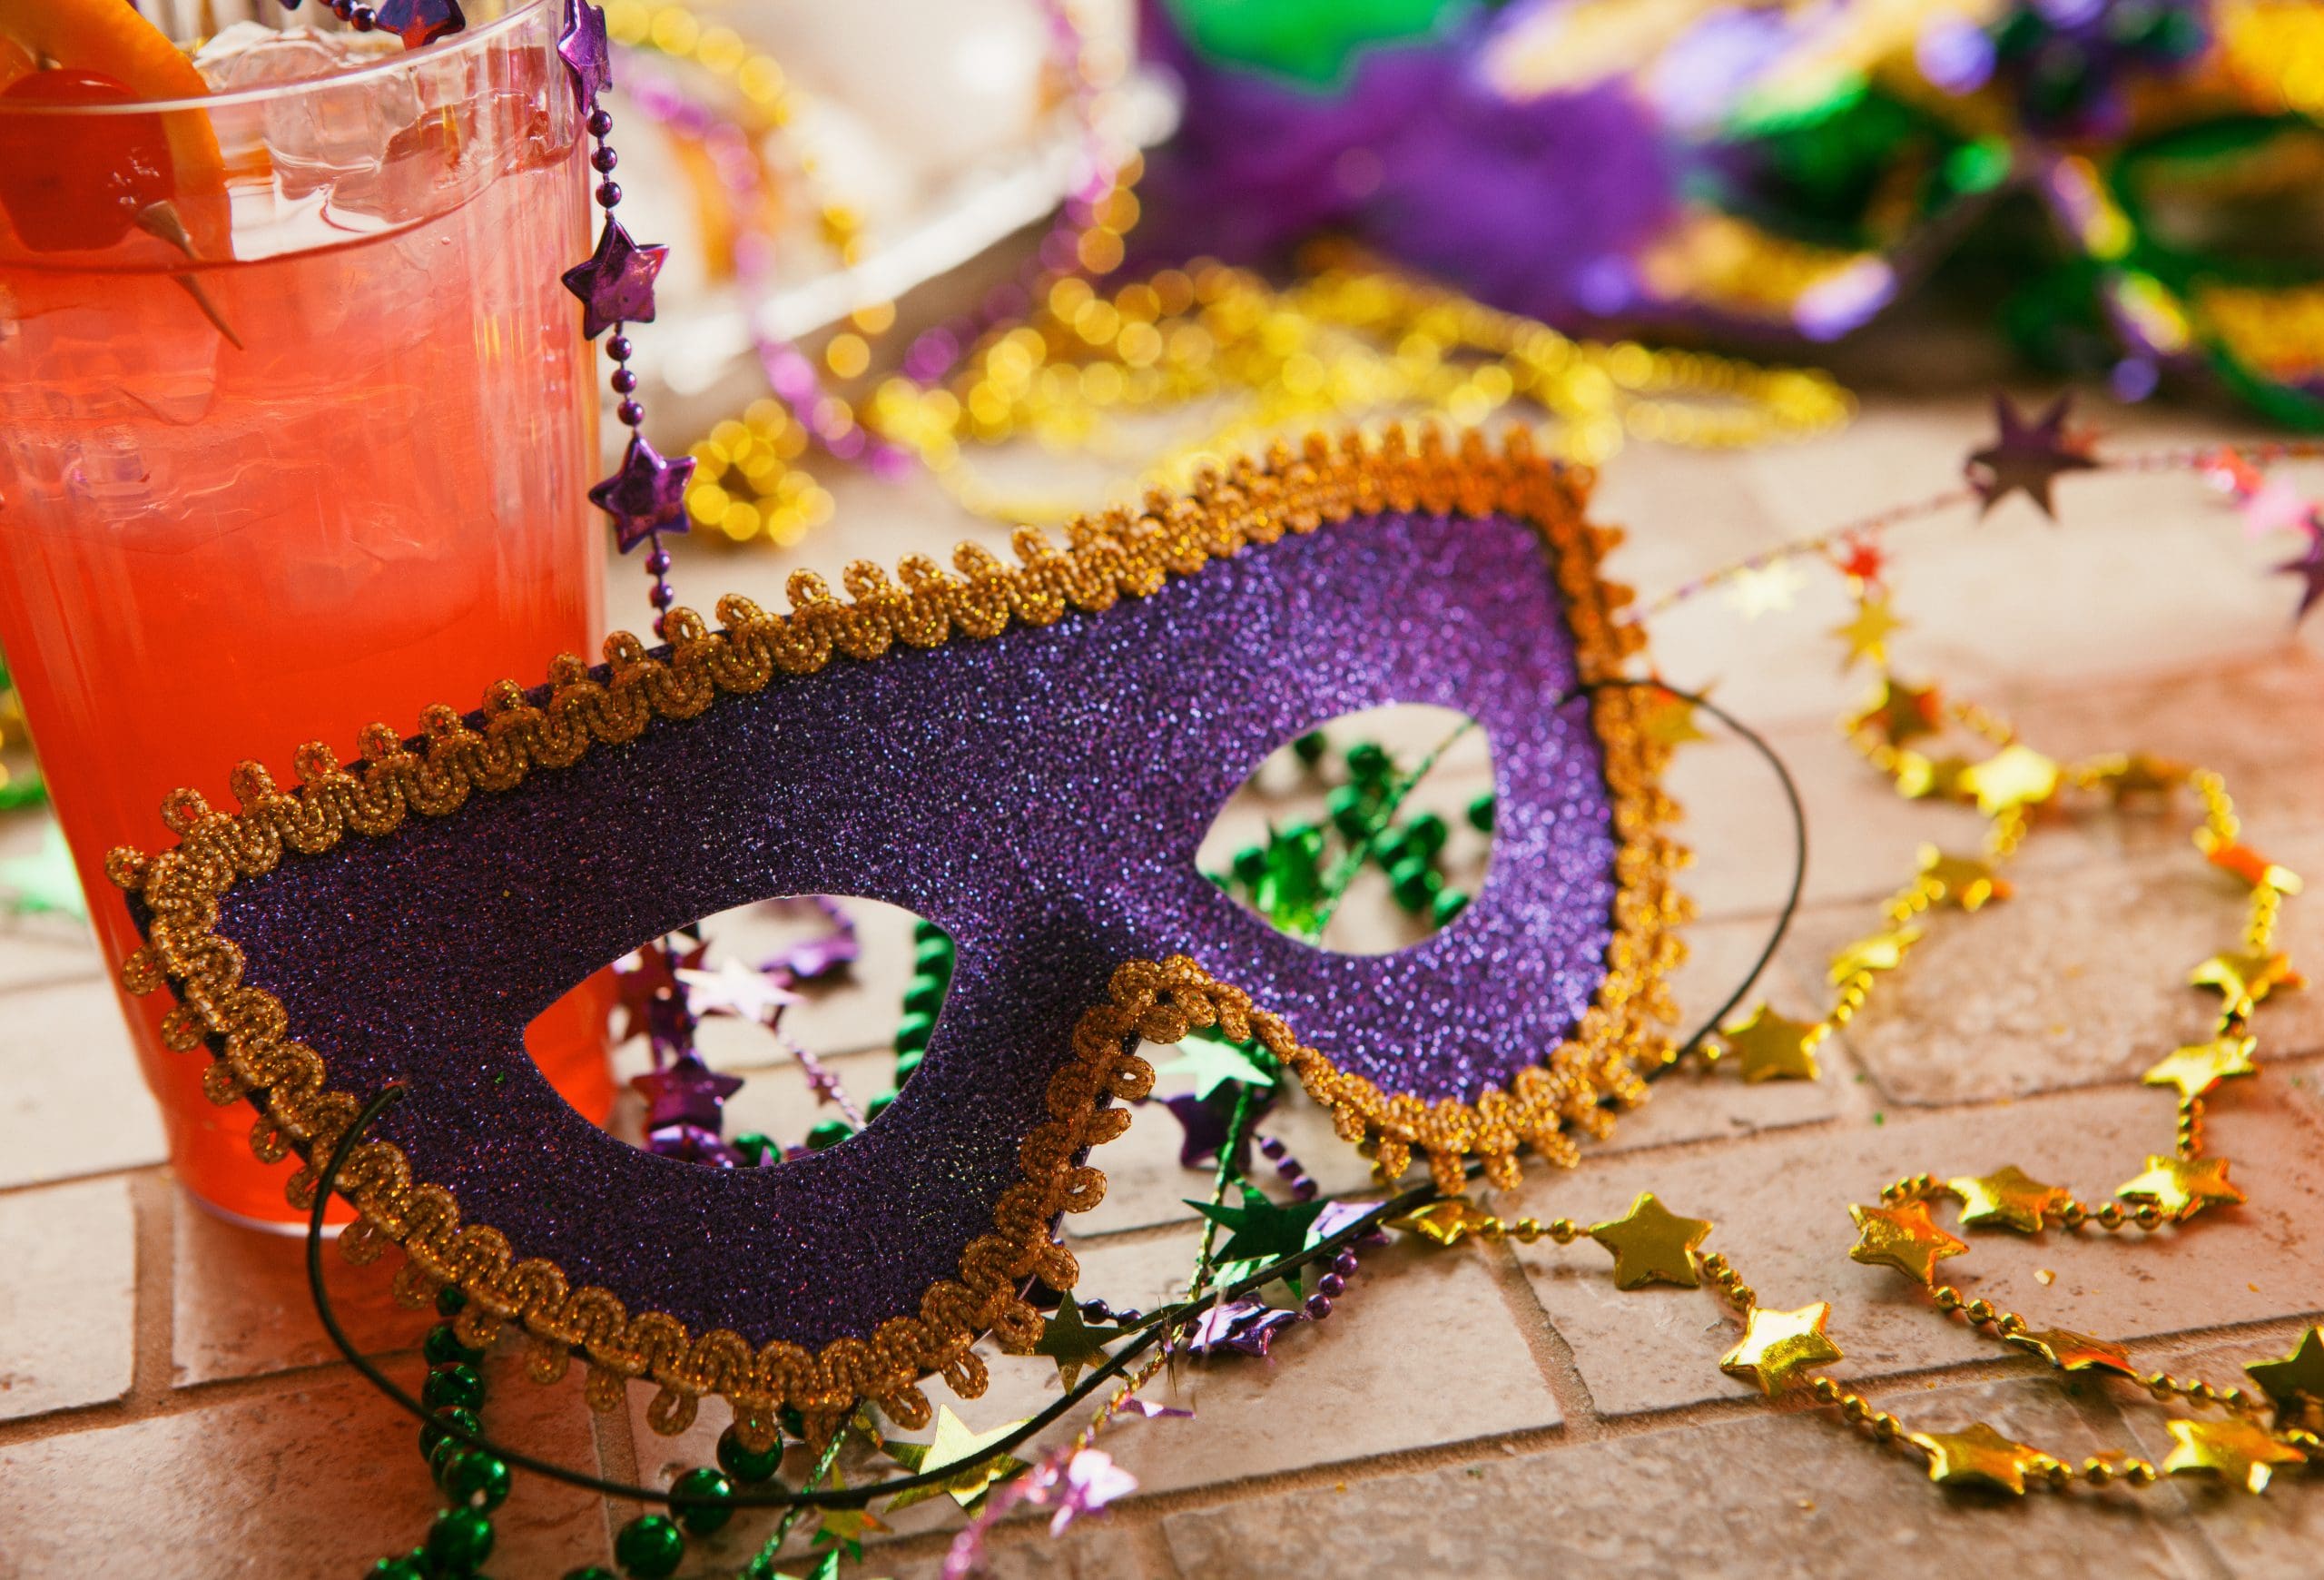 Series for the celebration of Mardi Gras, including Hurricane drinks, a King Cake, masks and trinkets.